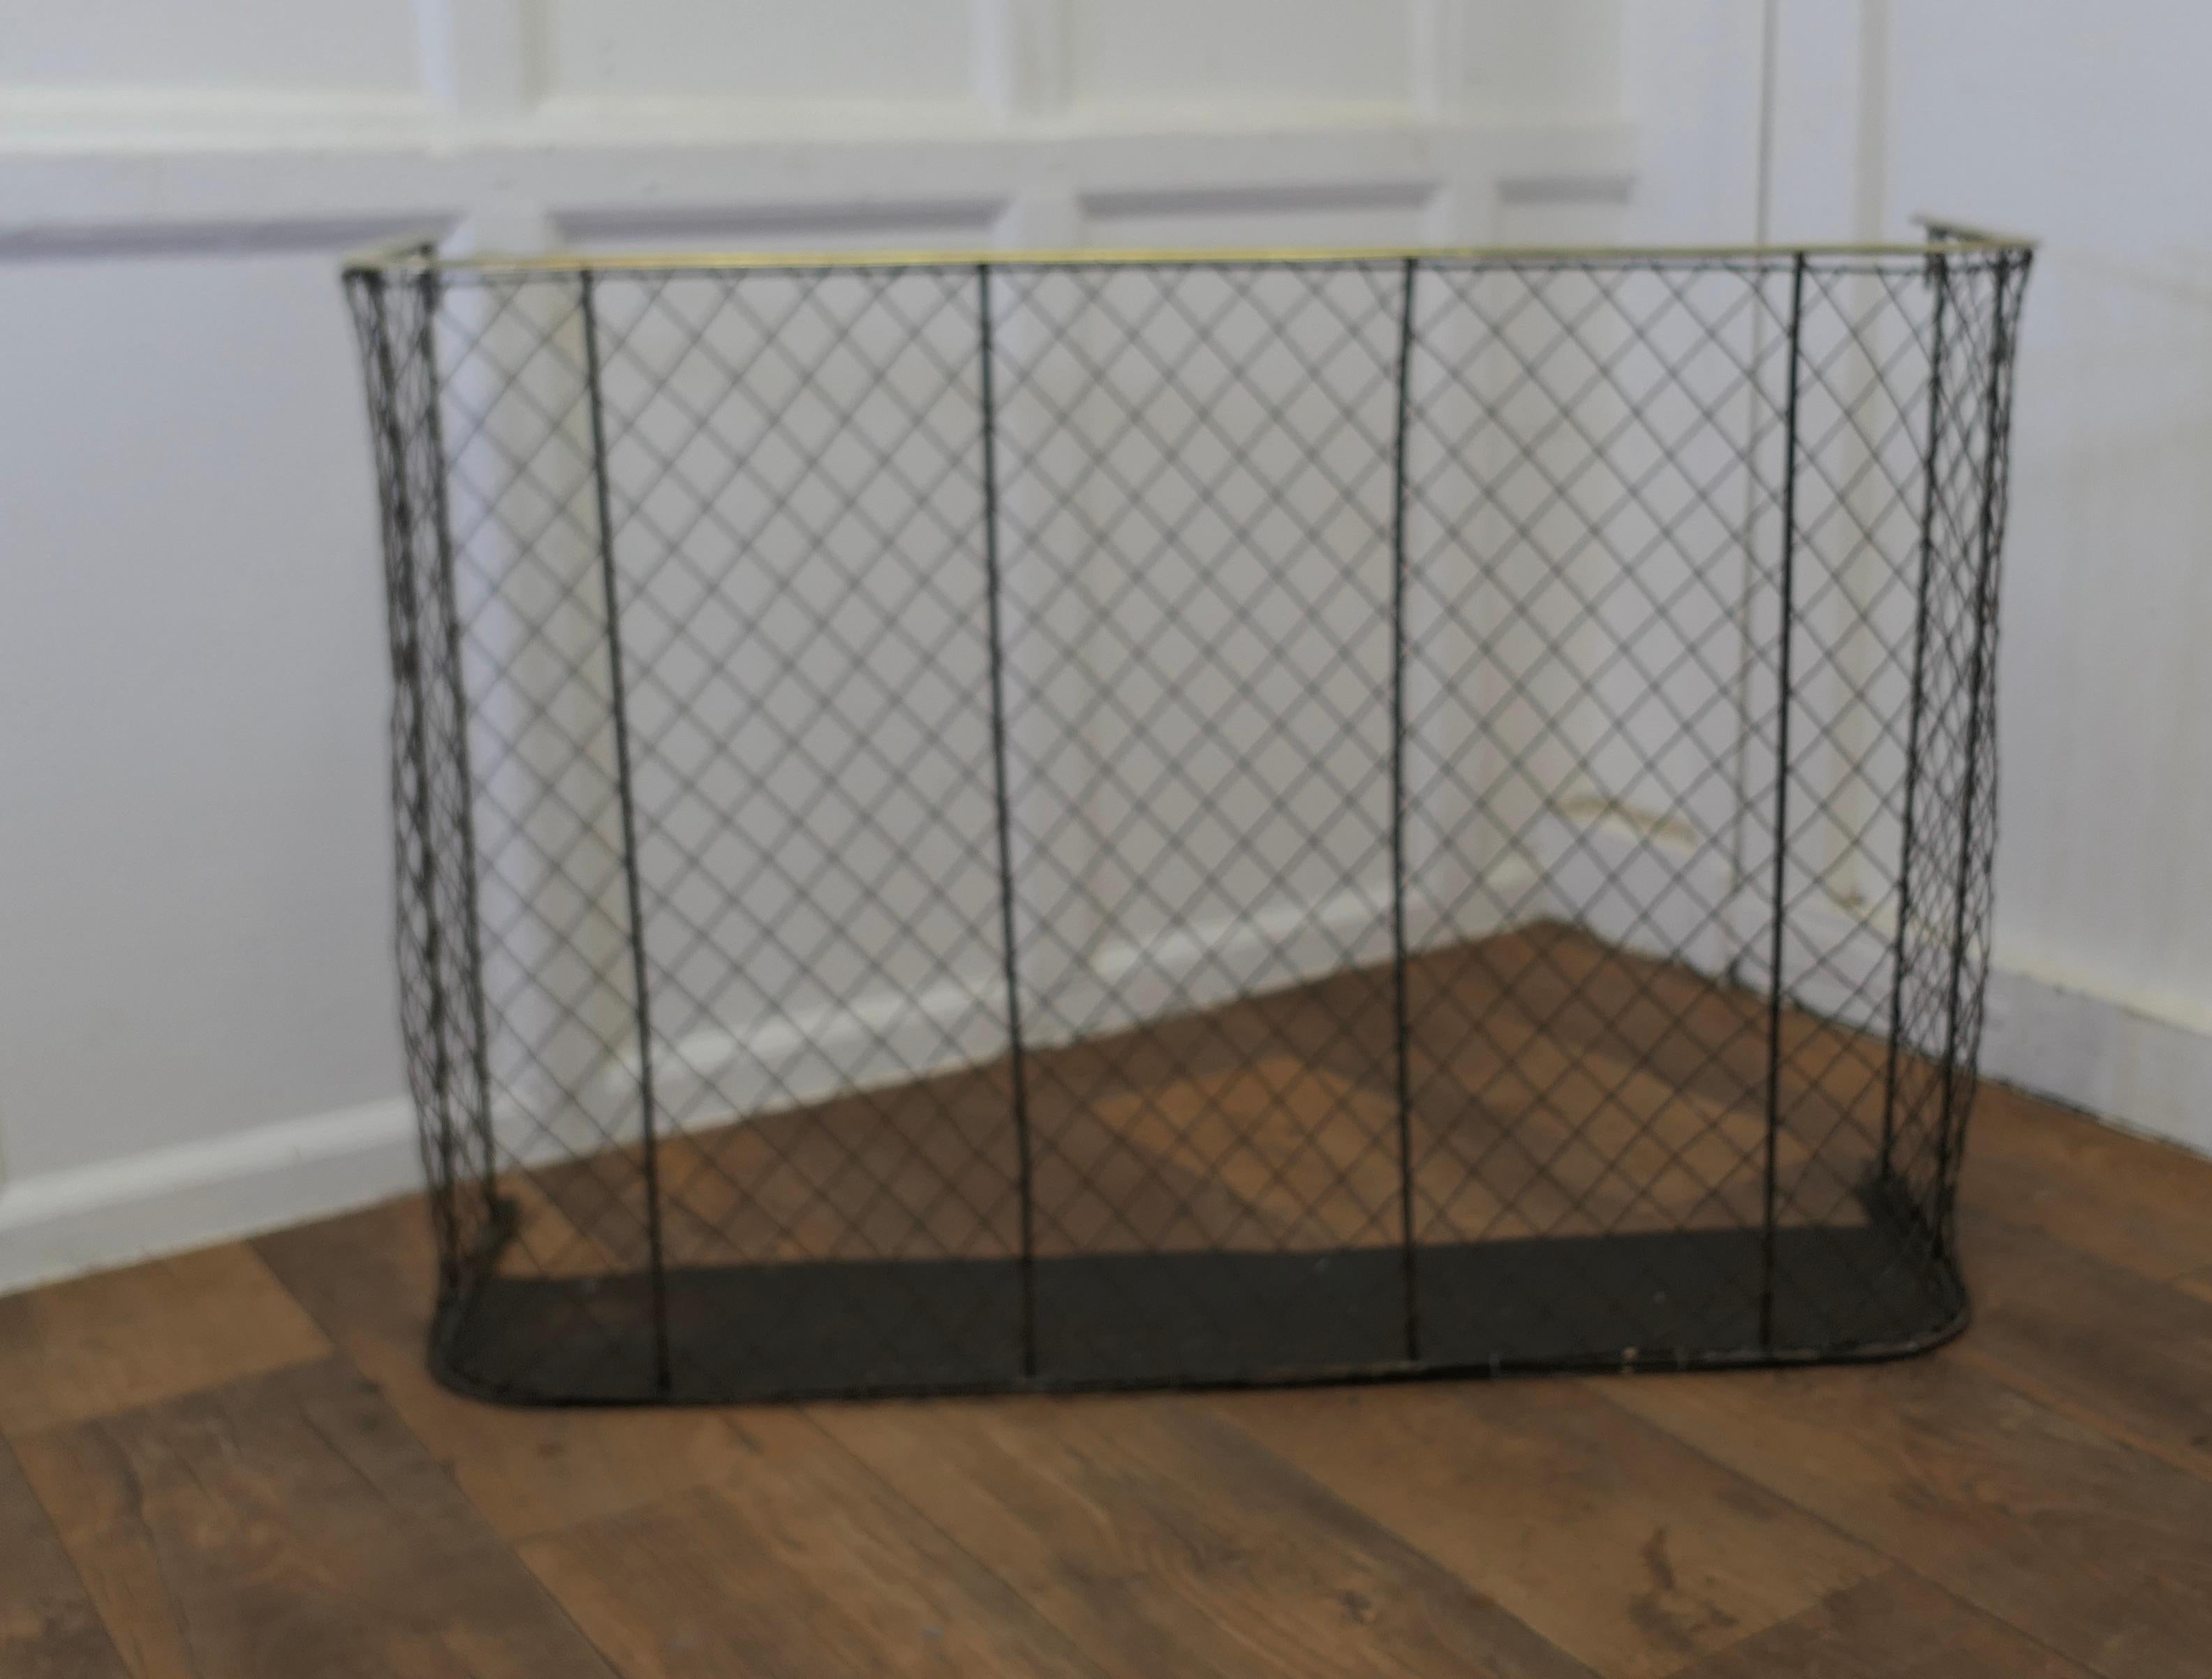 A High Victorian Nursery Fire Guard, Brass Fender 

A large, Early Victorian antique fire guard often known as a nursery guard as it completely surrounds the fire 
The fender has a slightly curved brass topped rail, with wire mesh, it is in good